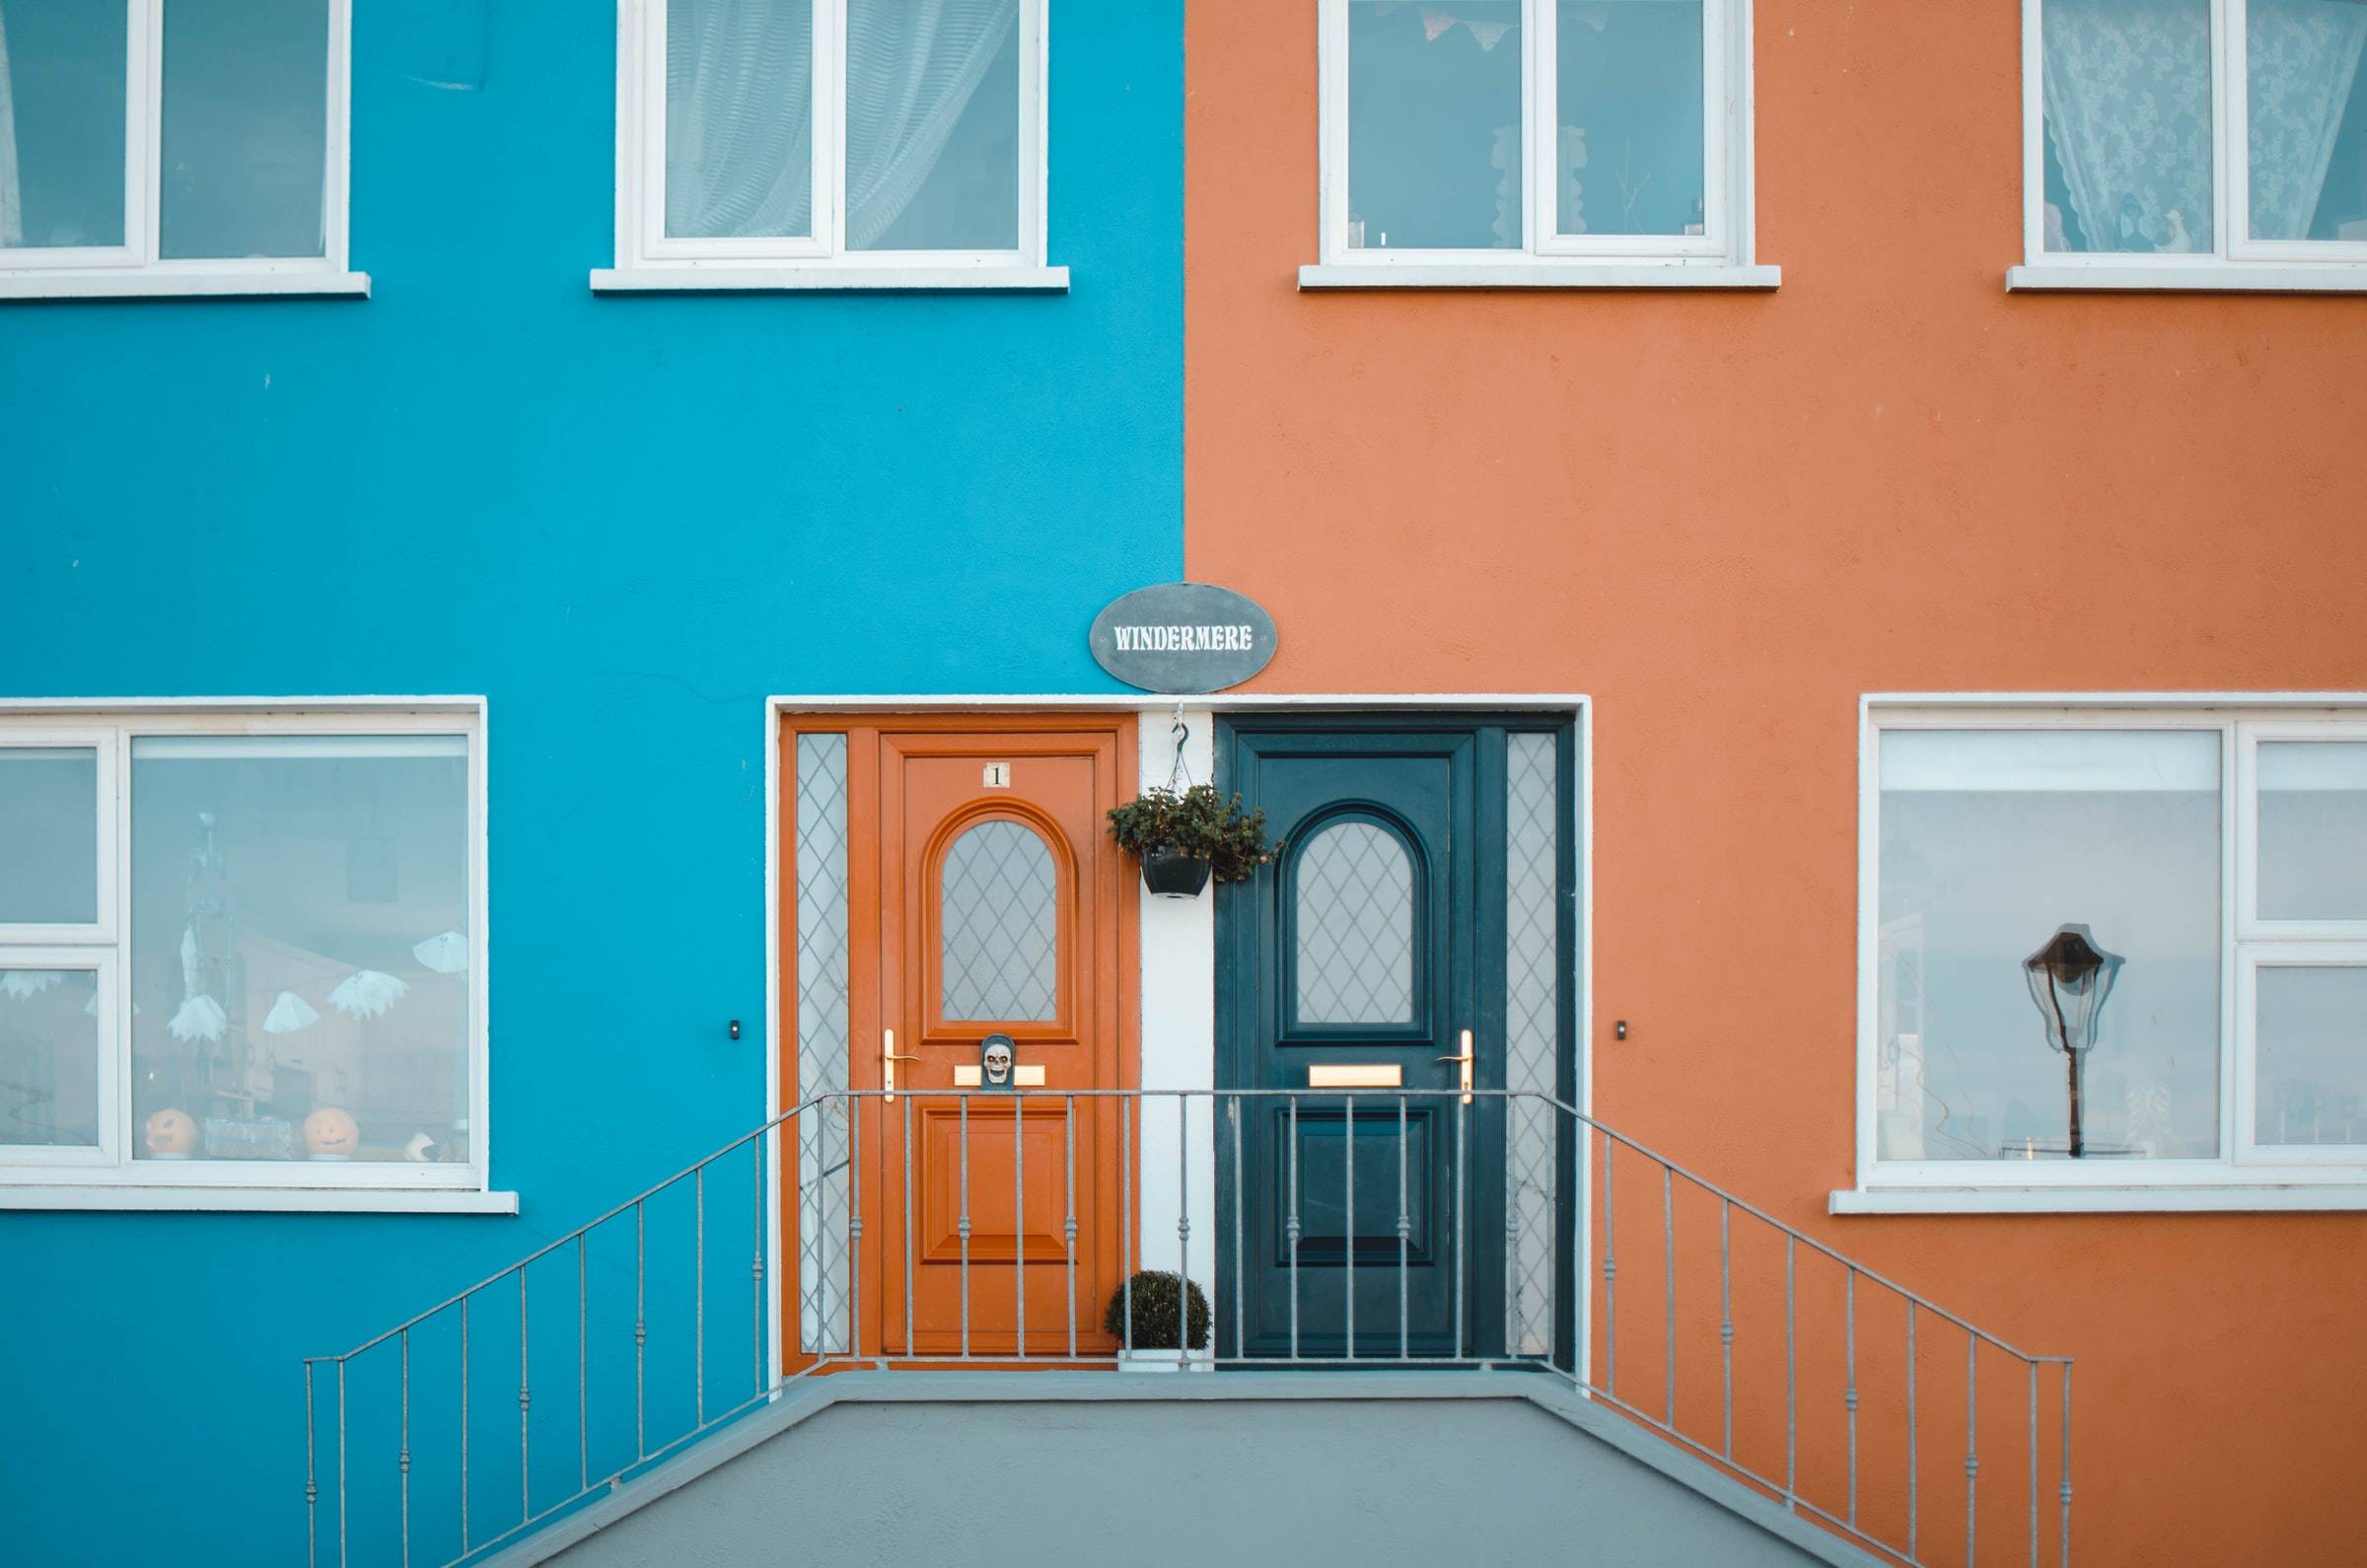 Photograph of a duplex. One side is cyan the other is orange. The front doors match the other's color theme.